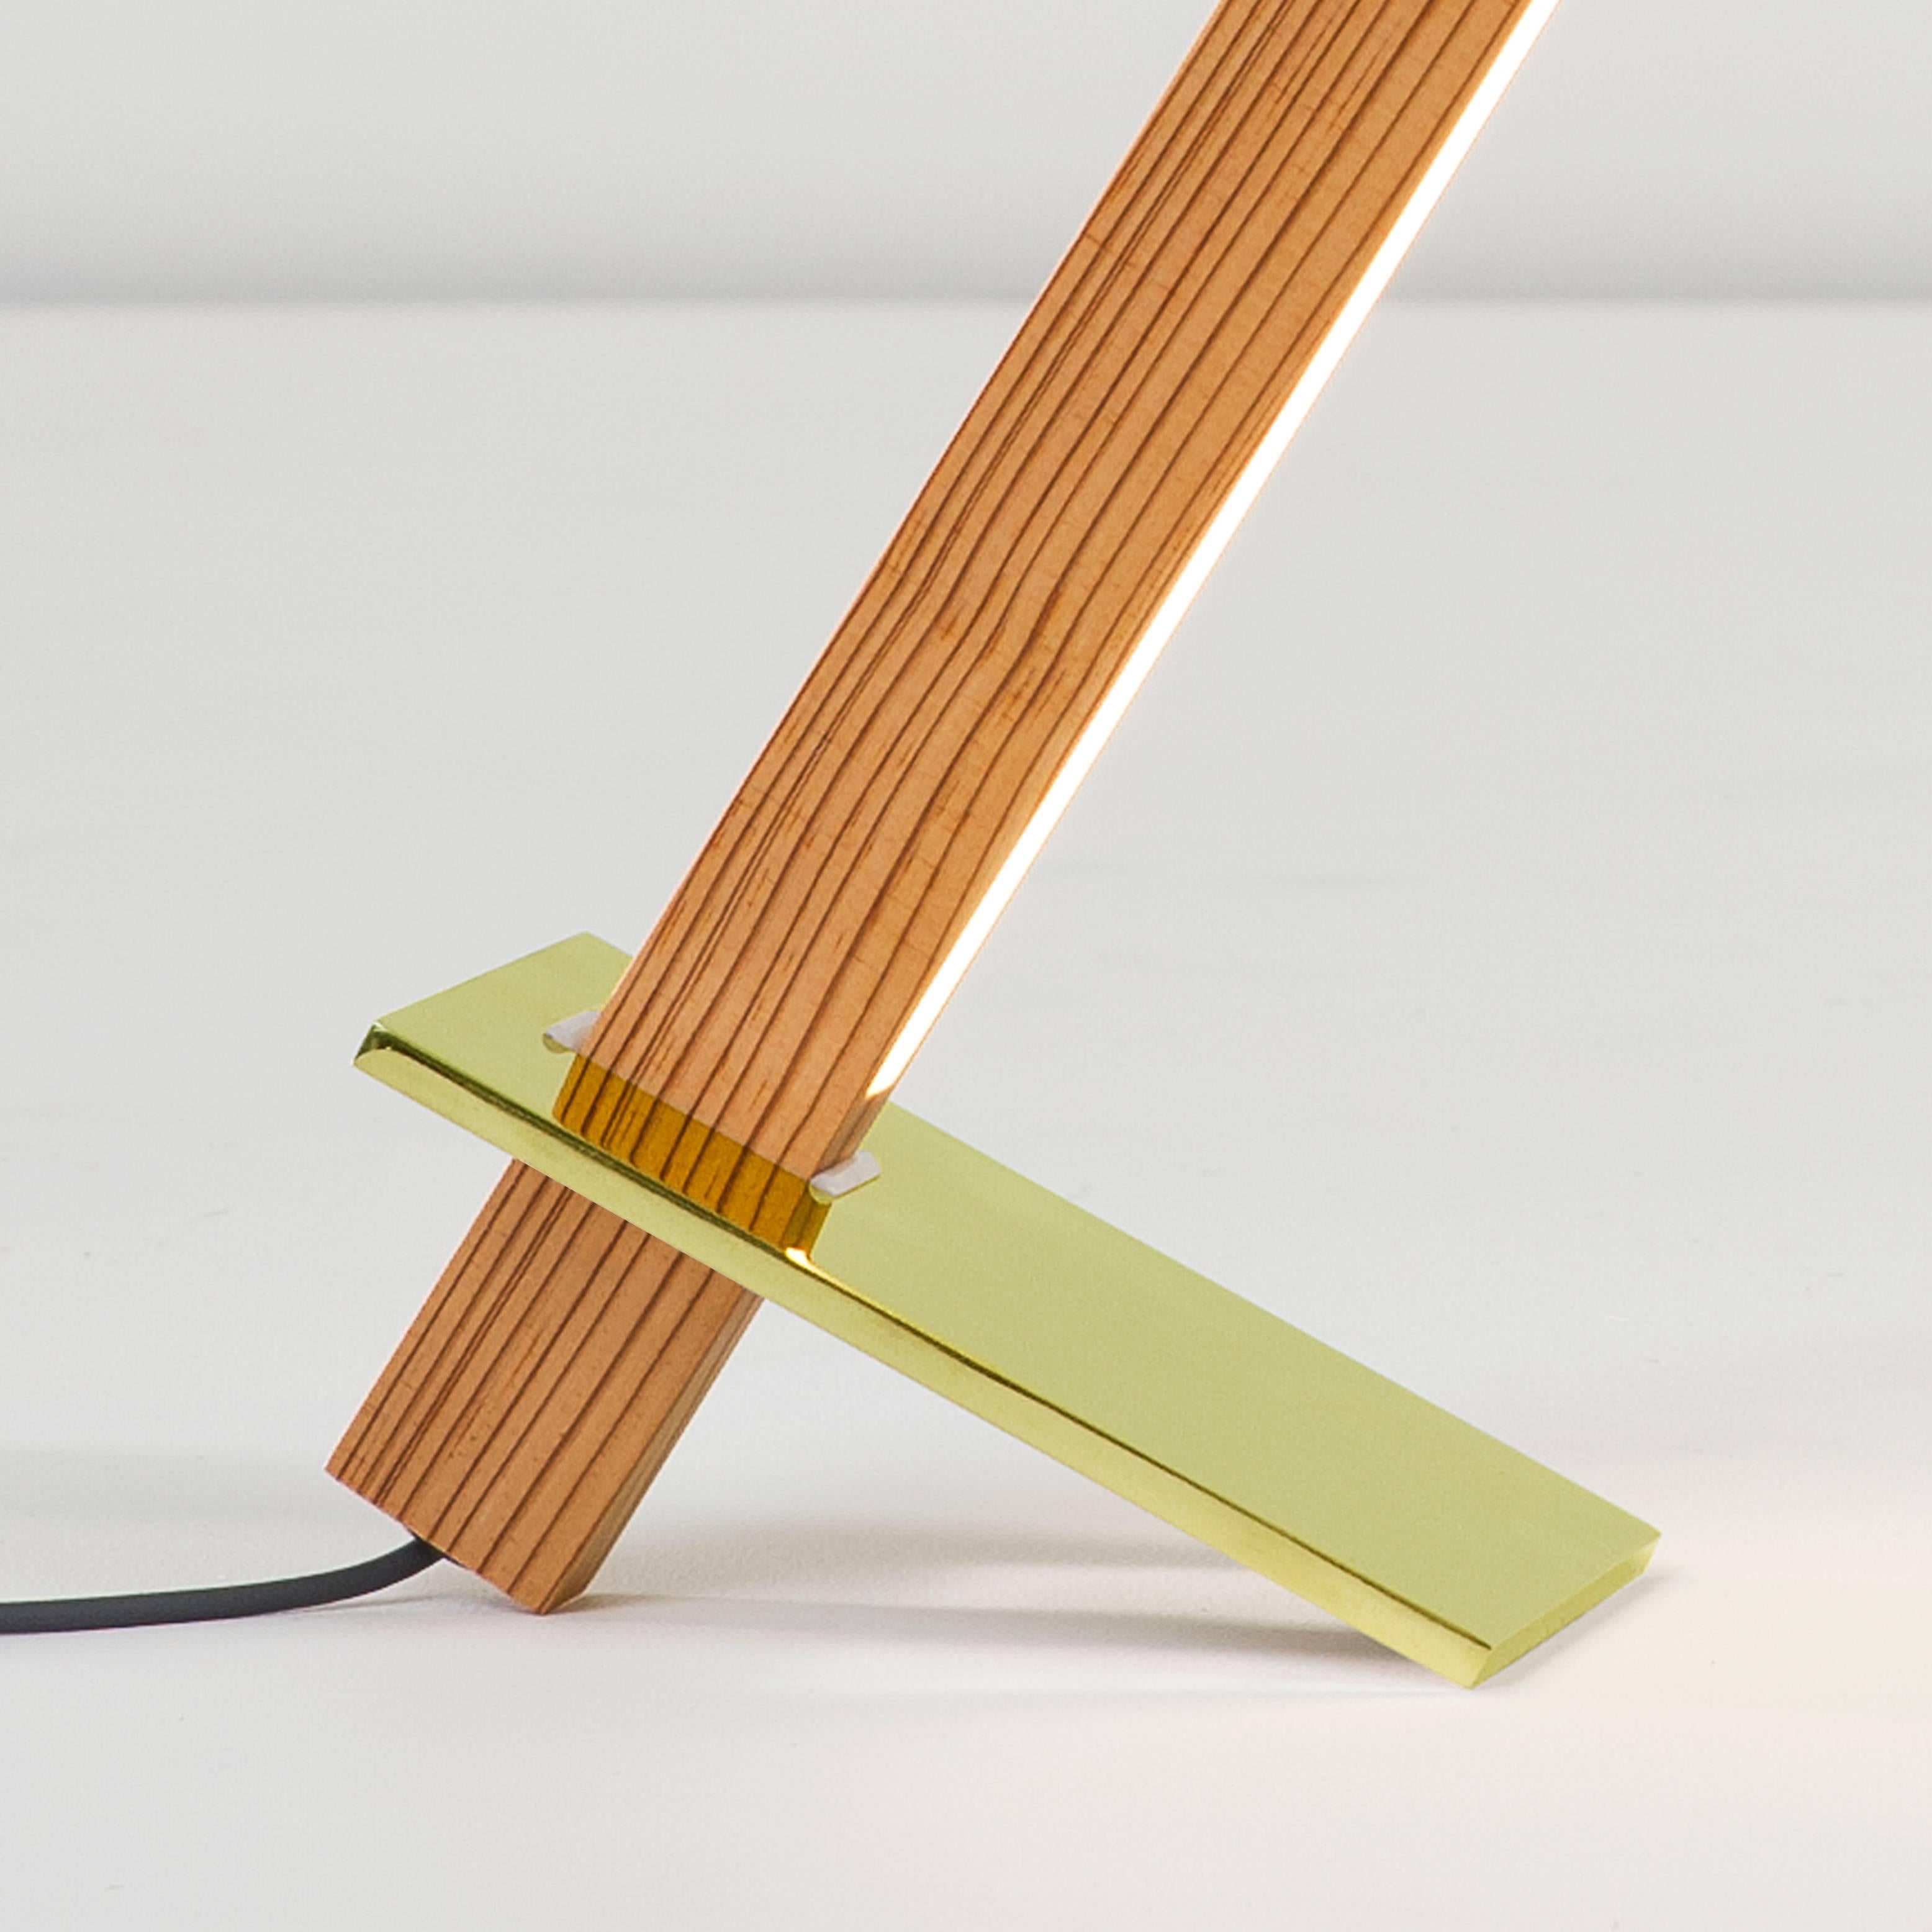 The Stickbulb LED 2ft table torch, the first lighting design created by Stickbulb, is now available in a limited edition of five offered exclusively through 1stdibs. Fabricated using limited edition Fire & Ice wood (featured in Stickbulb’s